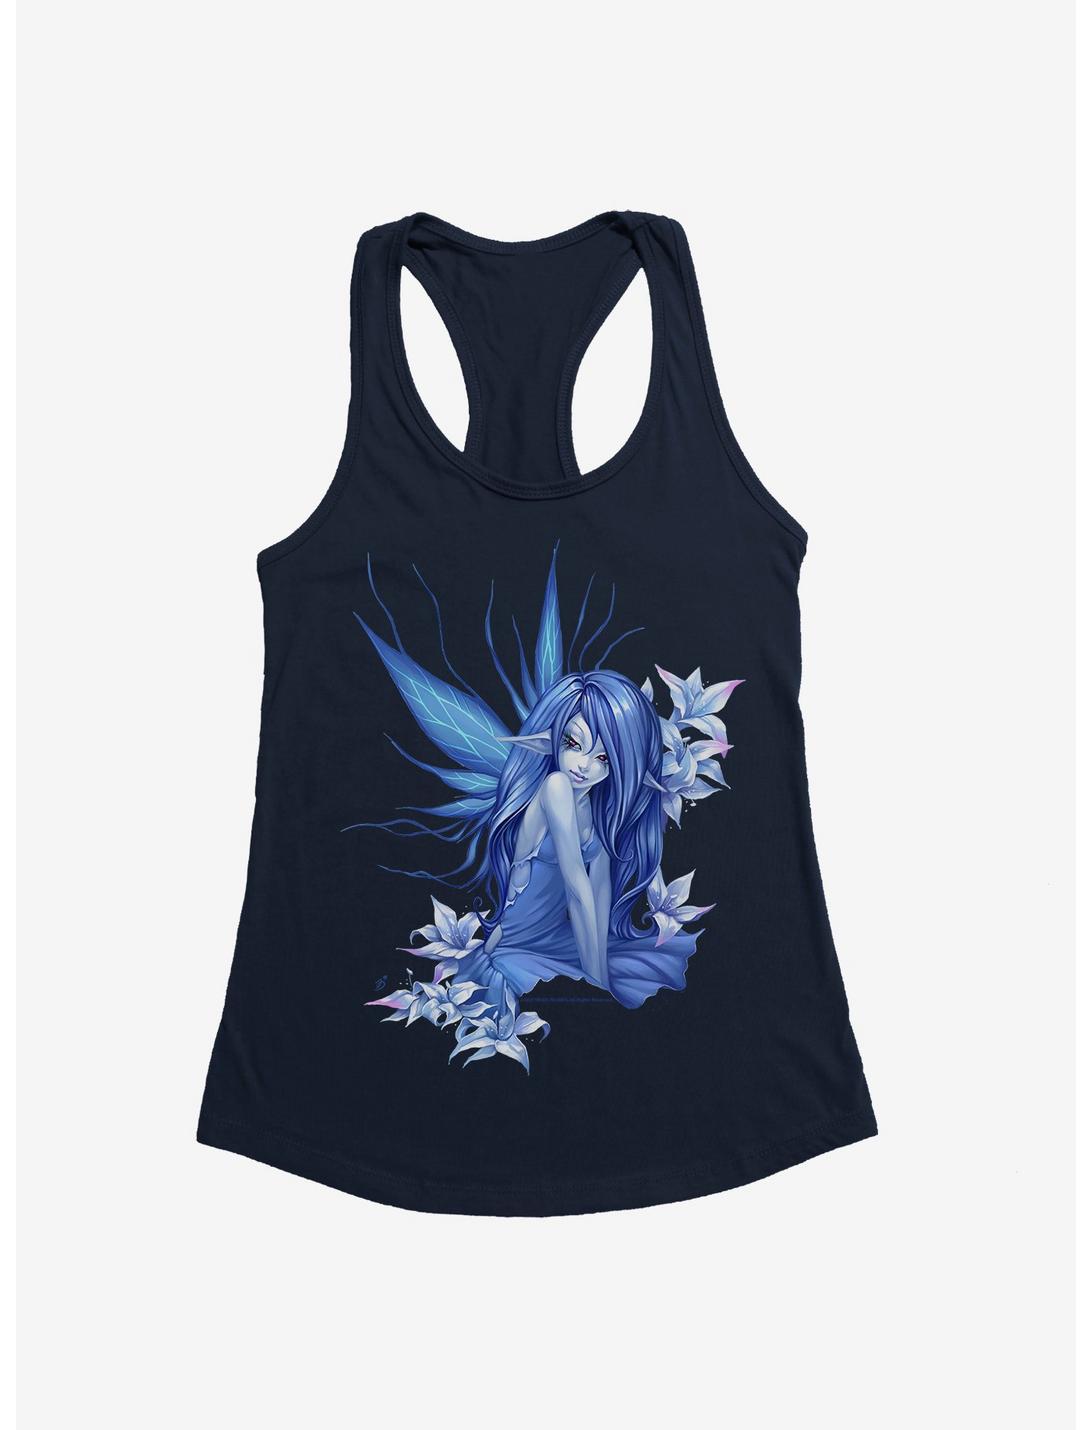 Fairies By Trick Blue Wing Girls Tank, NAVY, hi-res